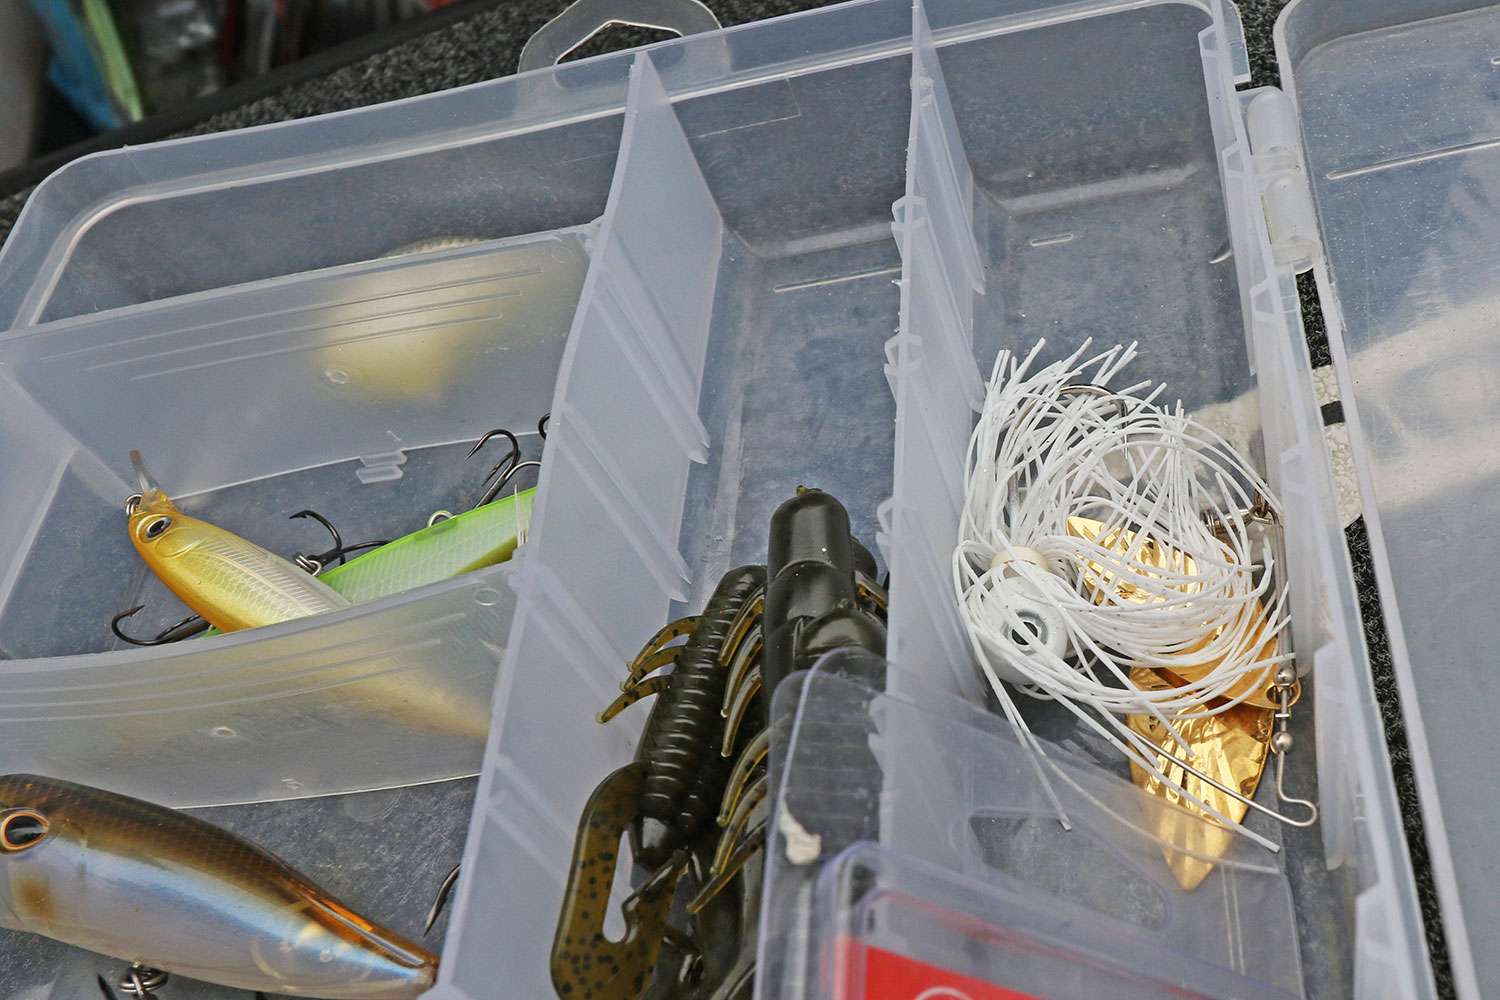 He said as anglers are learning their craft, he suggest choosing either silver- or brass-colored blades due to the versatility. Worrying about painted blades is another conversation down the road. 